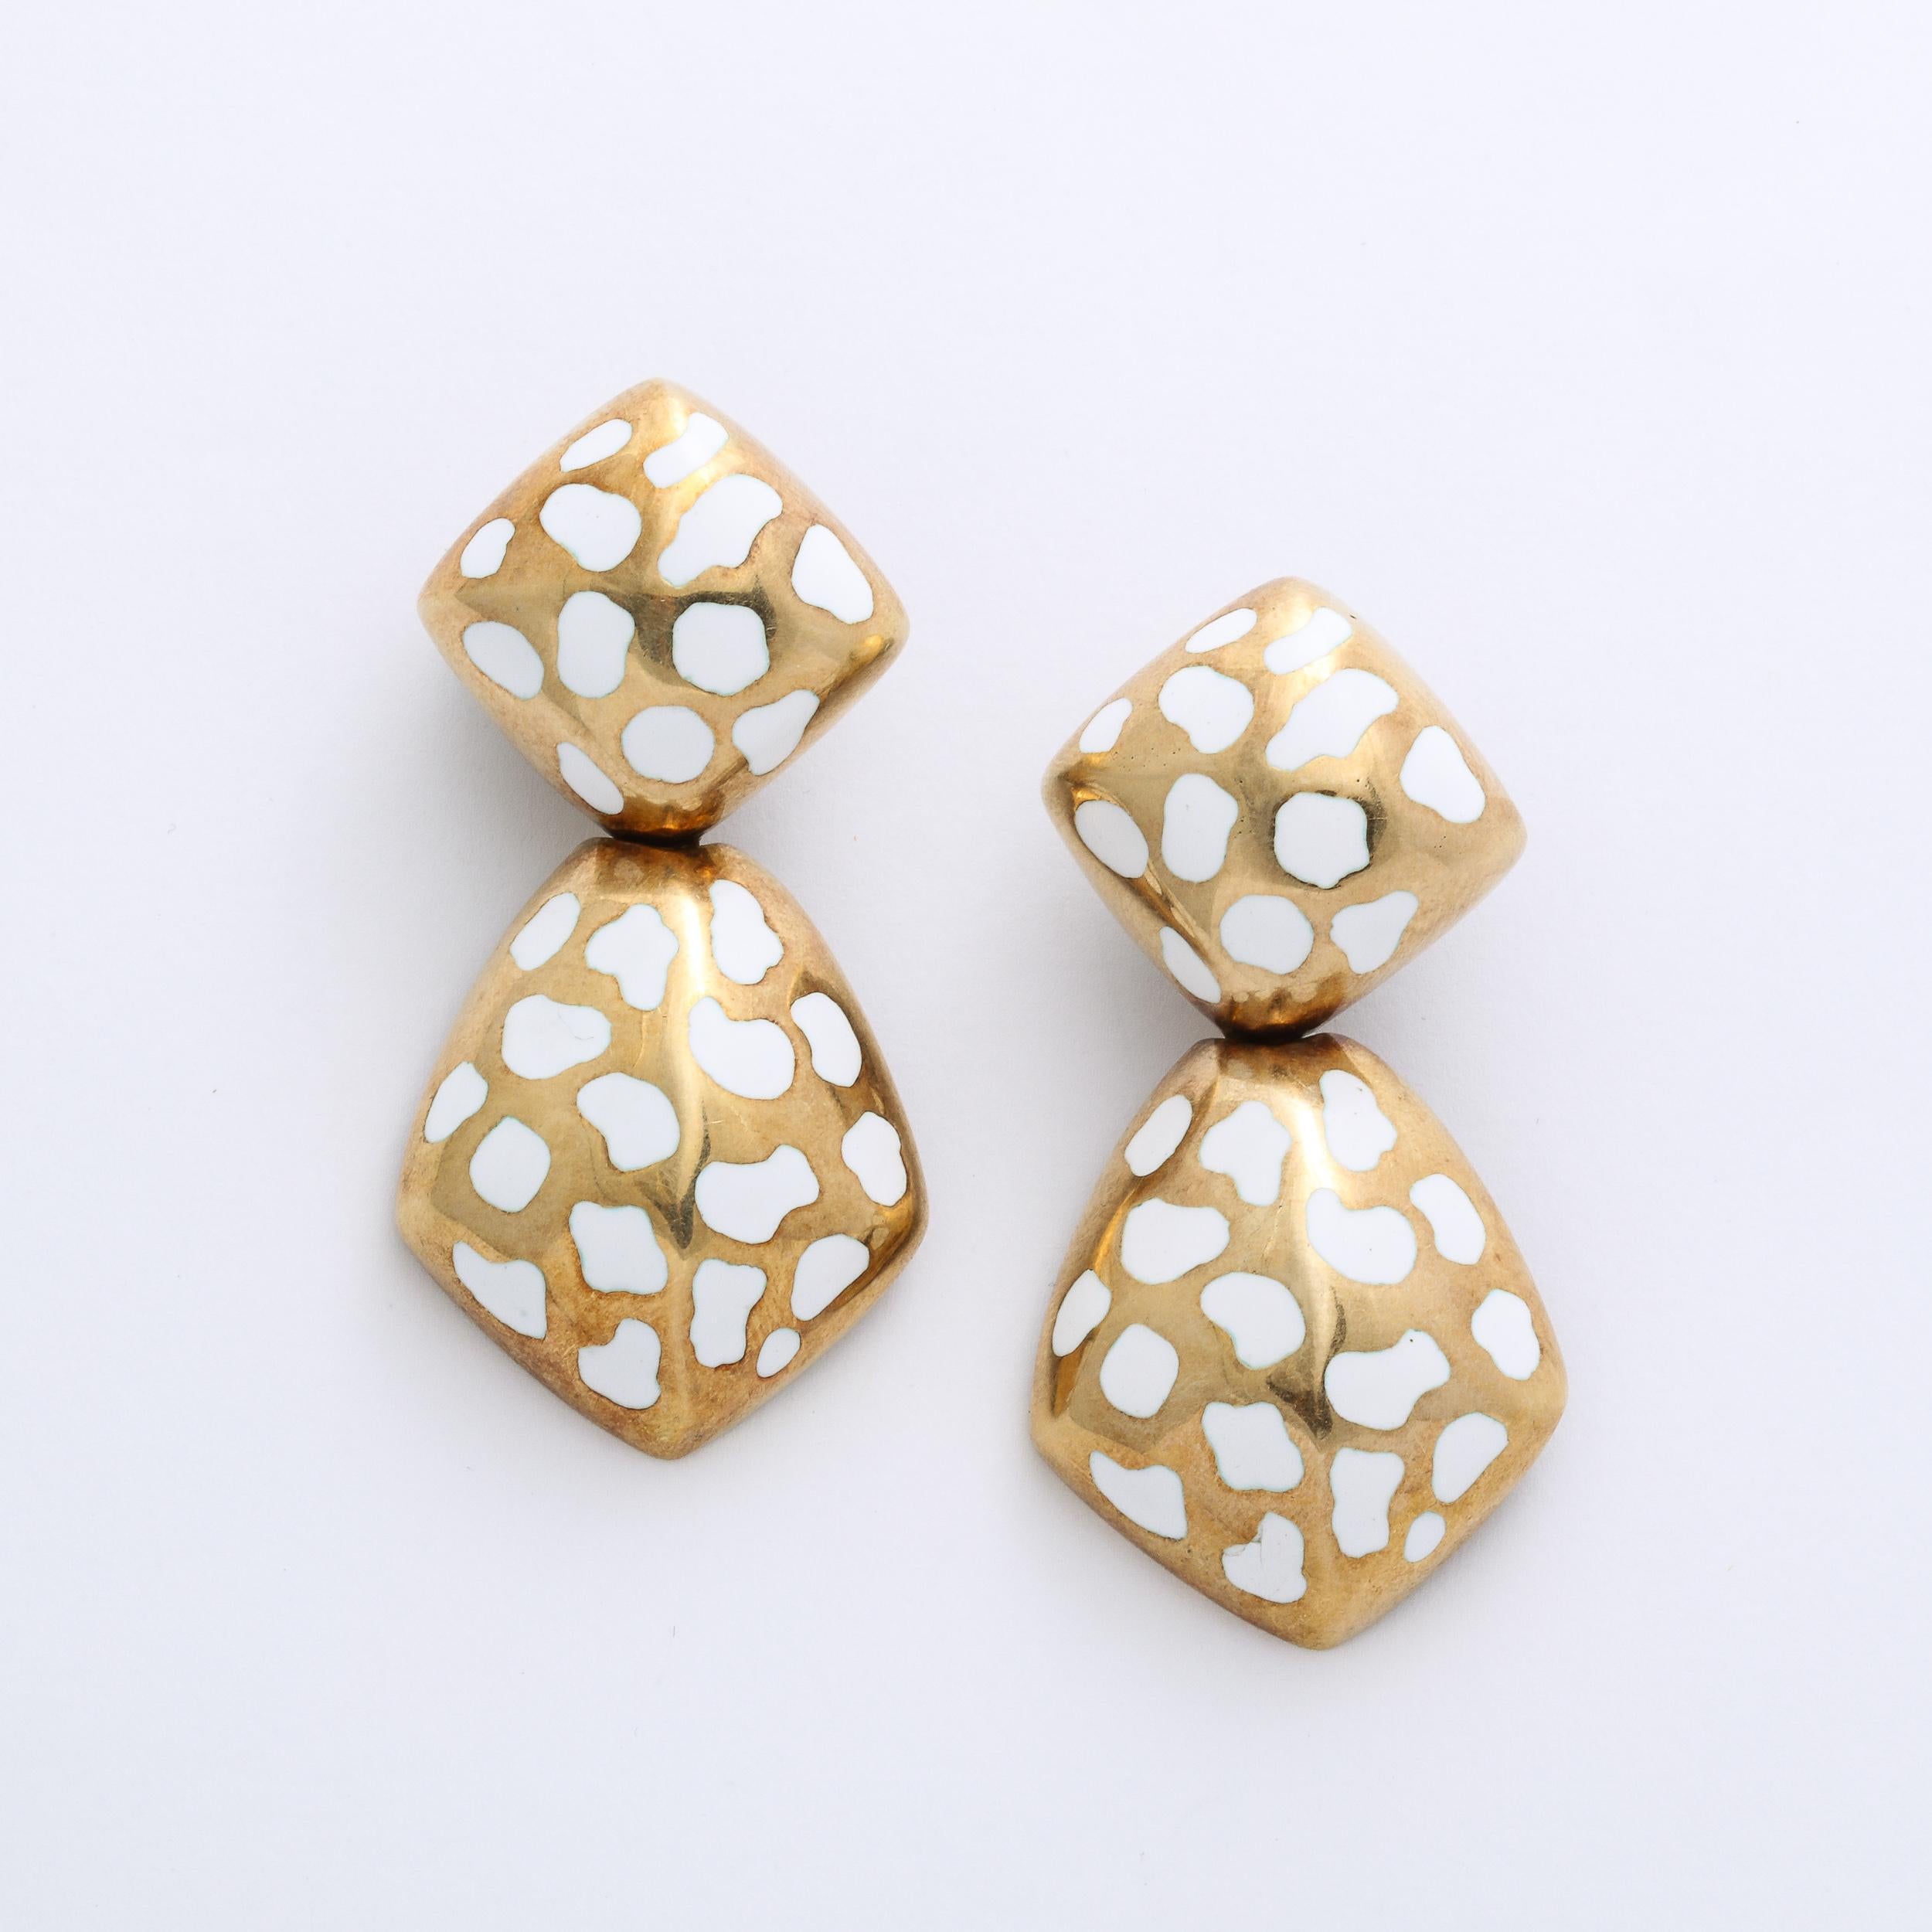 These bold pierced earrings are 14 yellow gold and are set with white enamel geometric and organic detailing. These are beautifully made and also can be converted to pierced if the owner wishes. Excellent vintage condition .

American circa